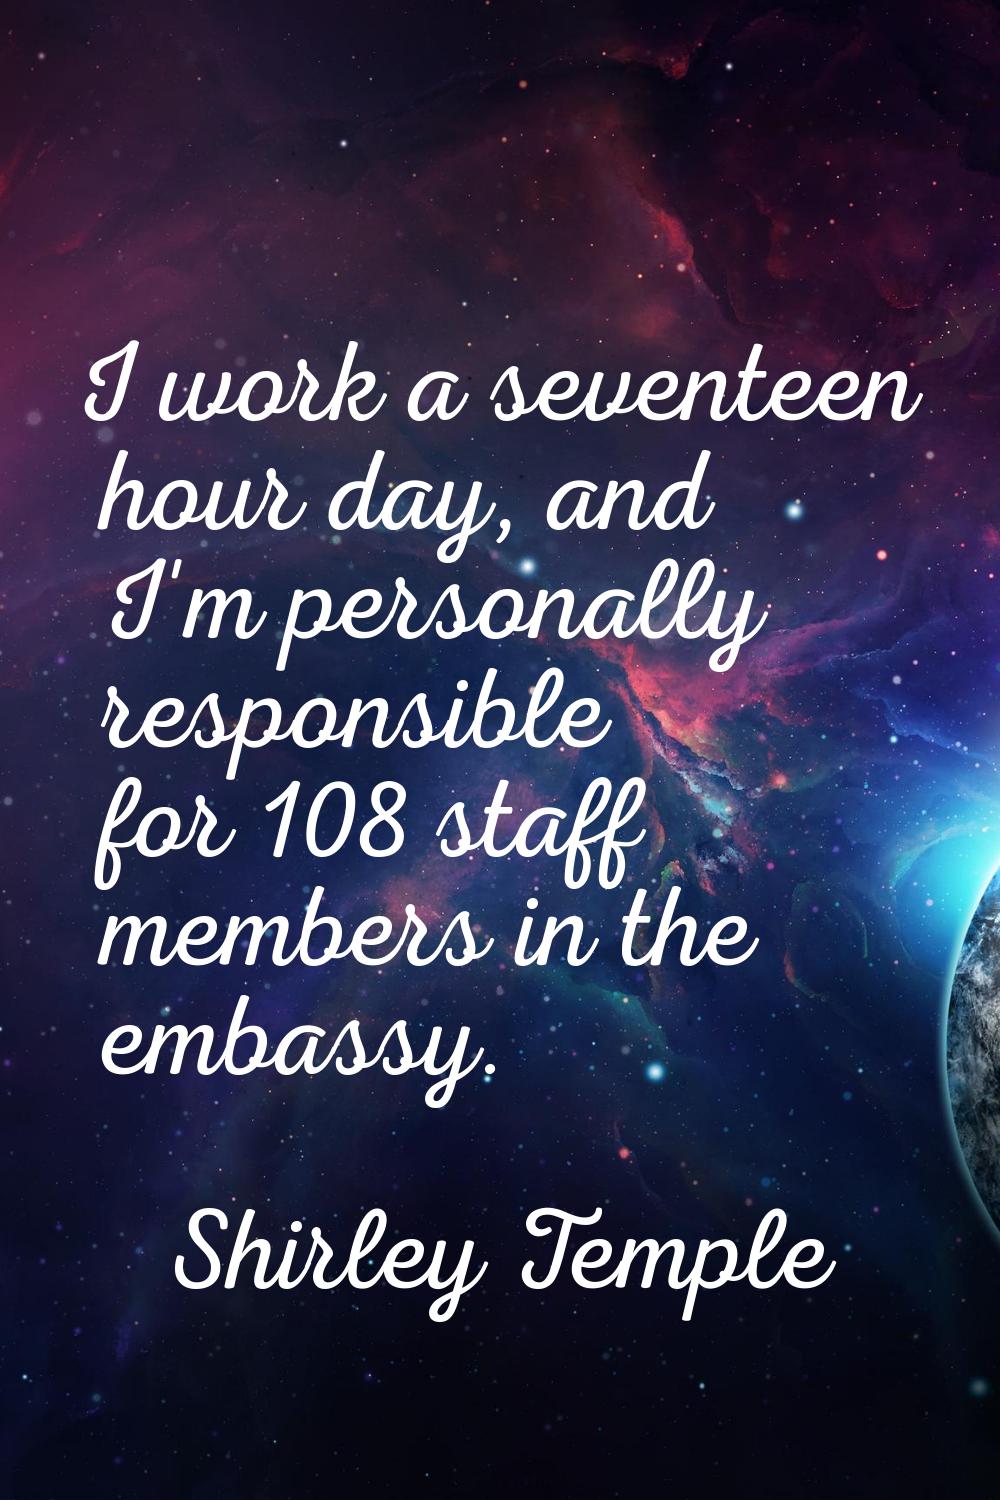 I work a seventeen hour day, and I'm personally responsible for 108 staff members in the embassy.